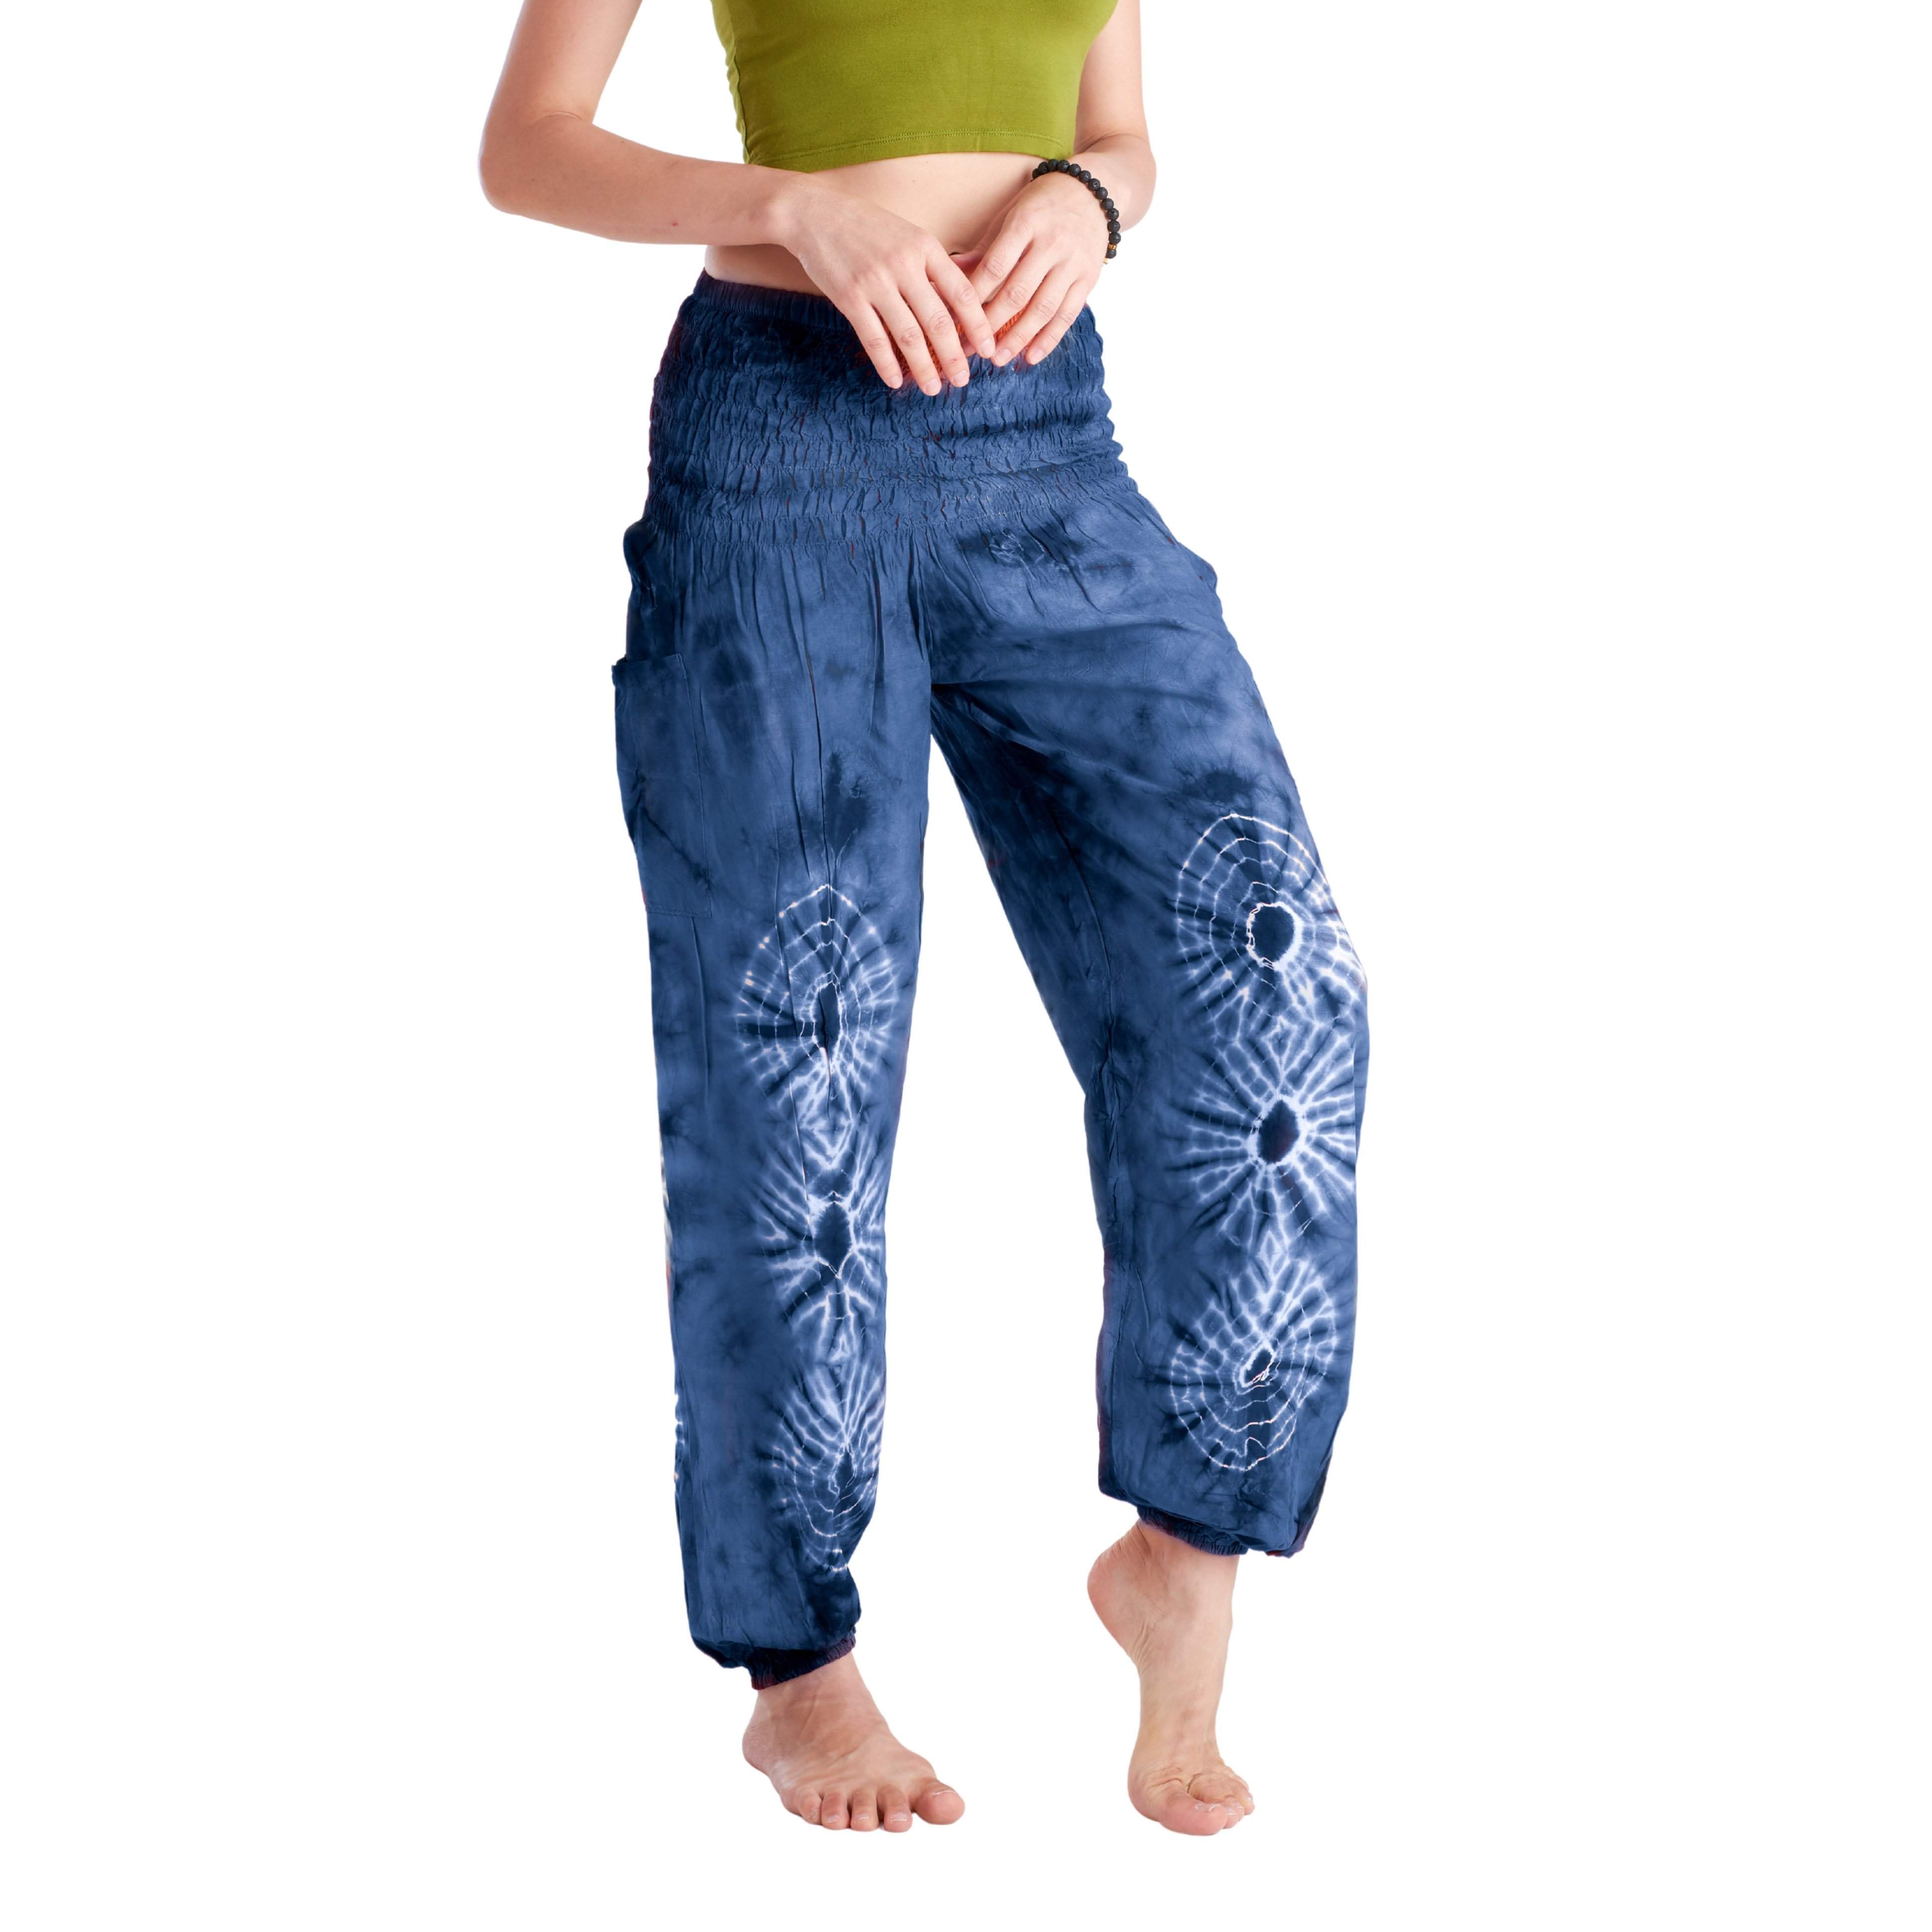 Elastic Waist - Buy Today Elephant Pants Jewelry And Bohemian Clothes Handmade In Thailand Help To Save The Elephants FairTrade And Vegan